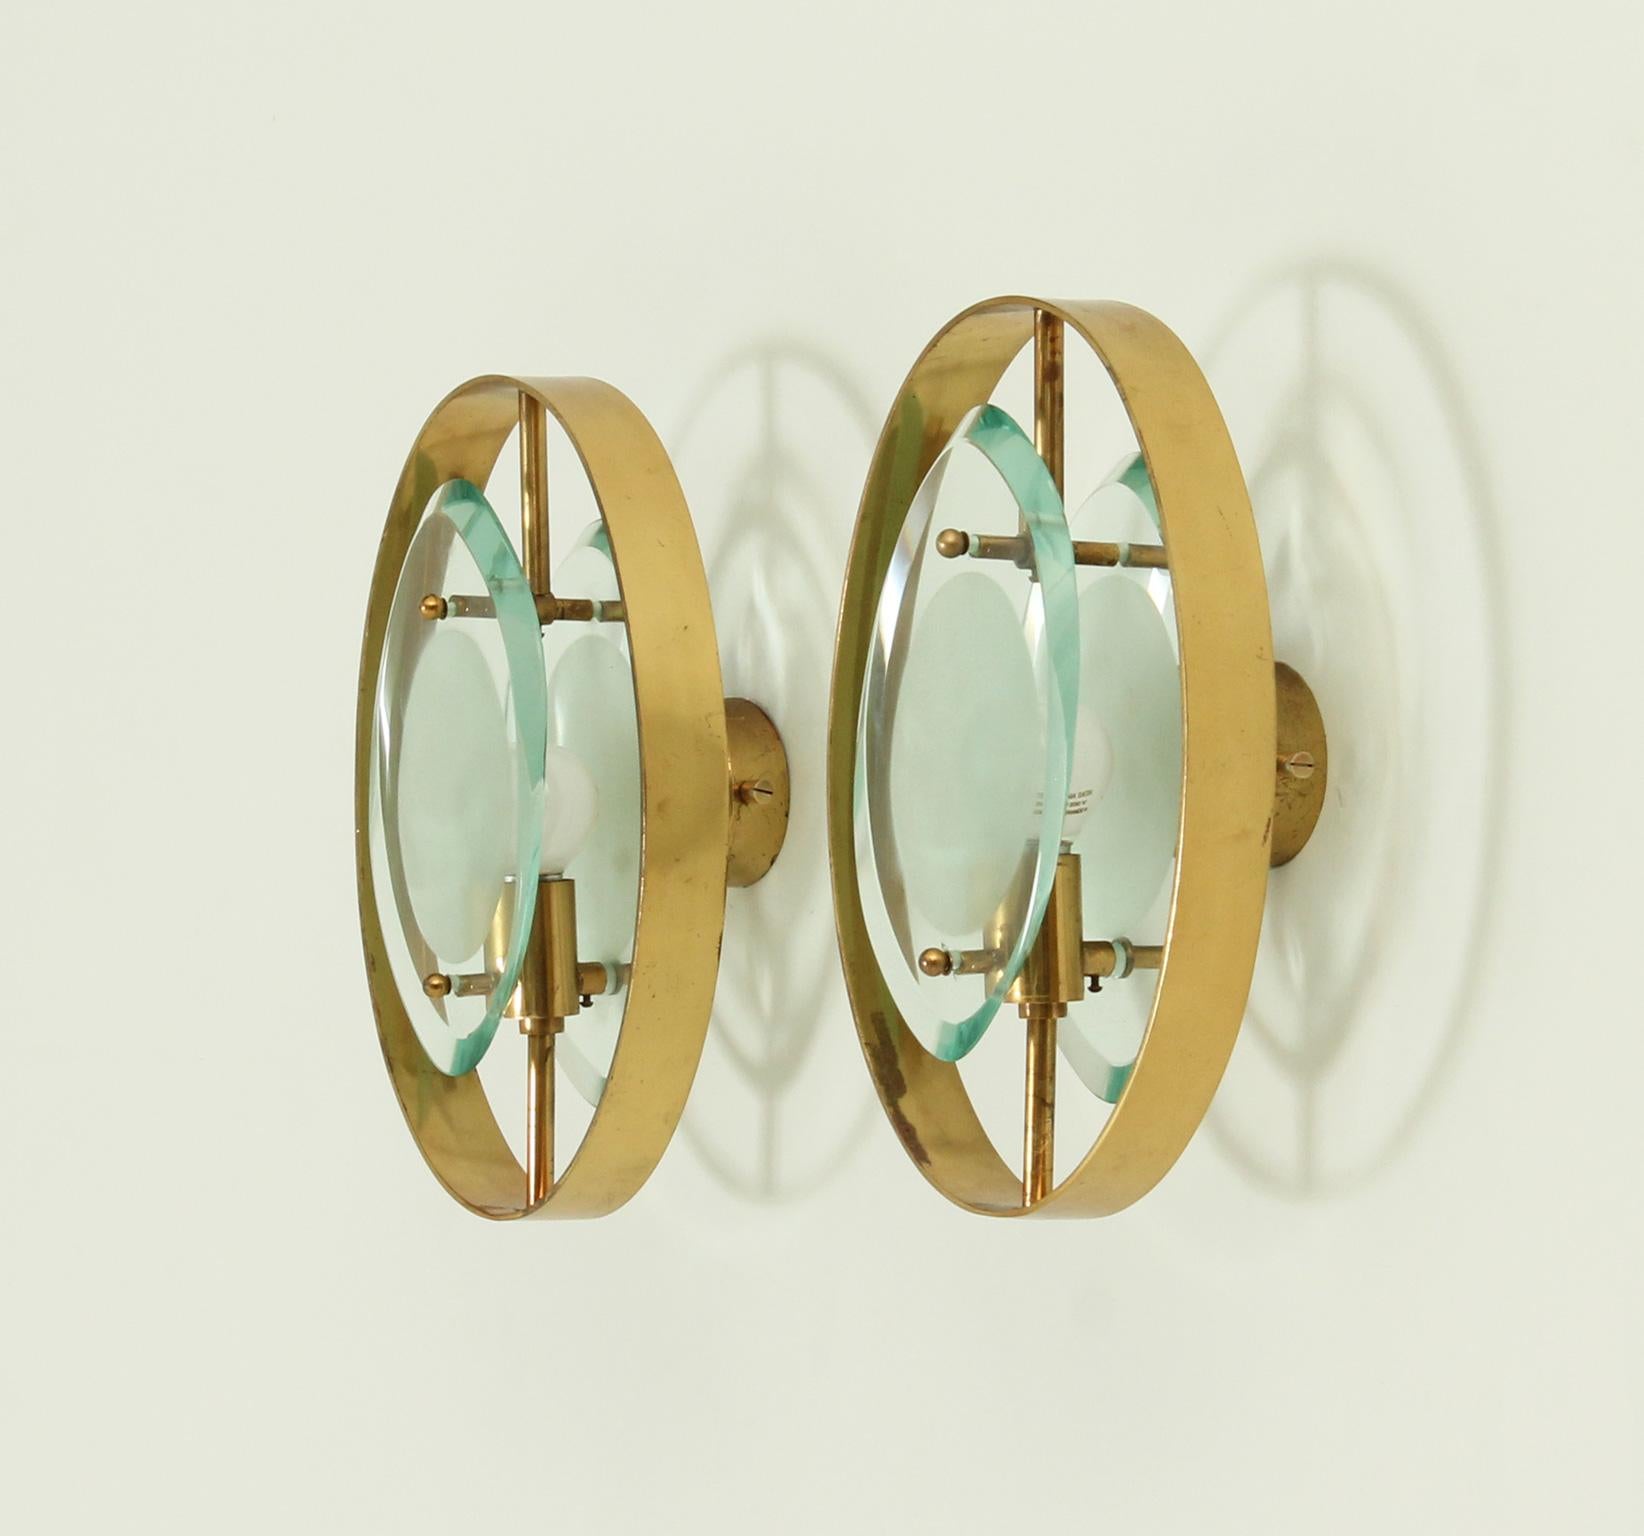 Italian Pair of Sconces Model 2240 by Max Ingrand for Fontana Arte